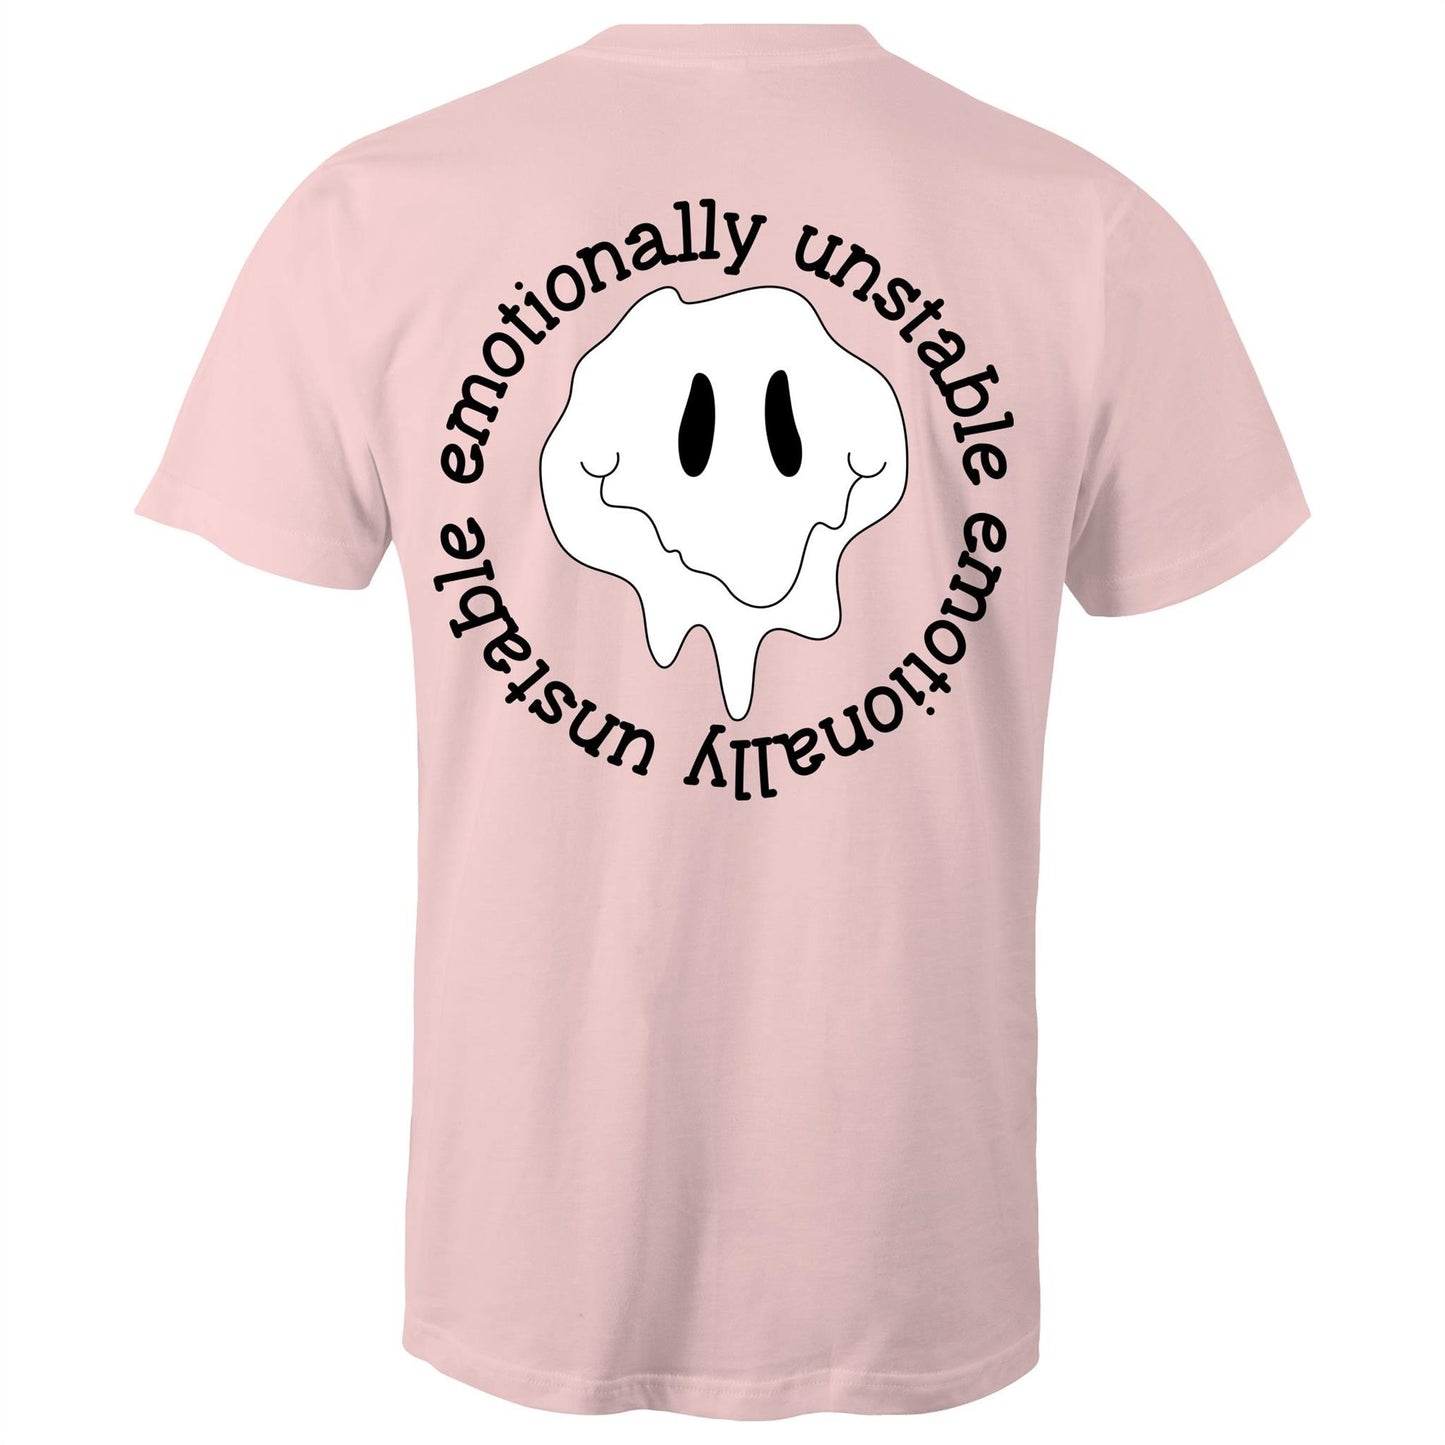 Mens T-Shirt - Emotionally Unstable